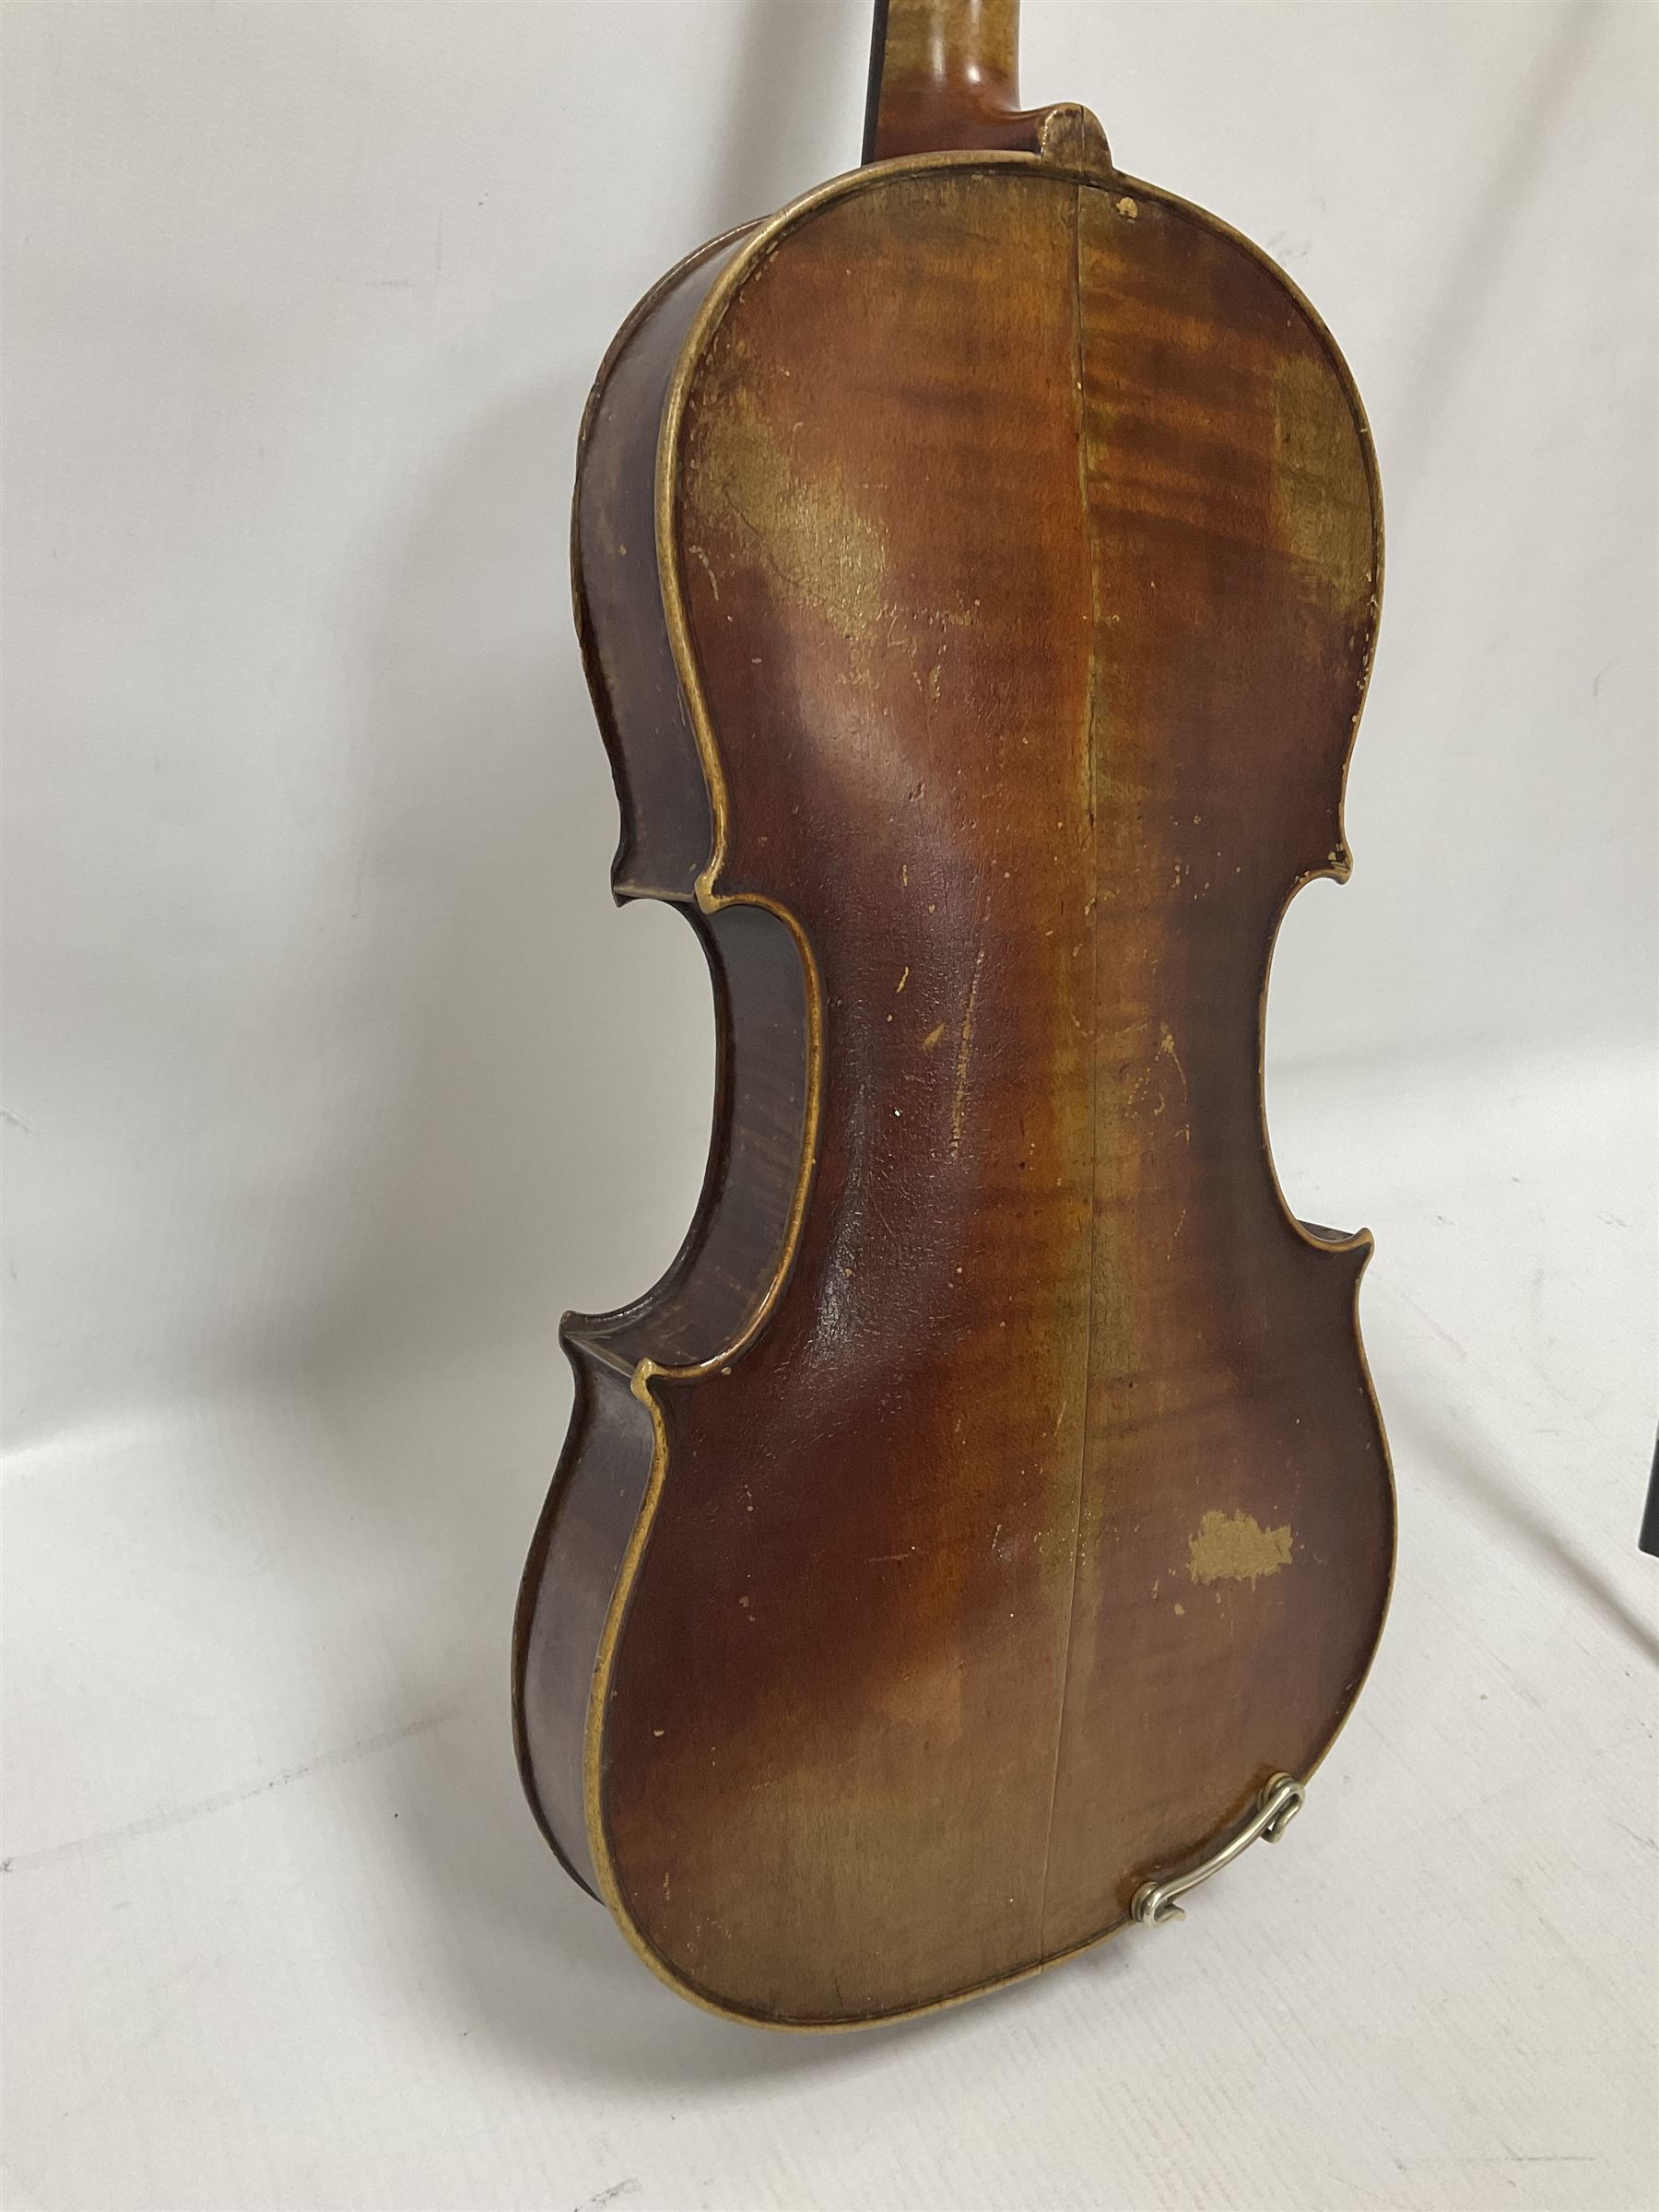 Full size violin and bow in a wooden constructed fitted case - Image 14 of 23